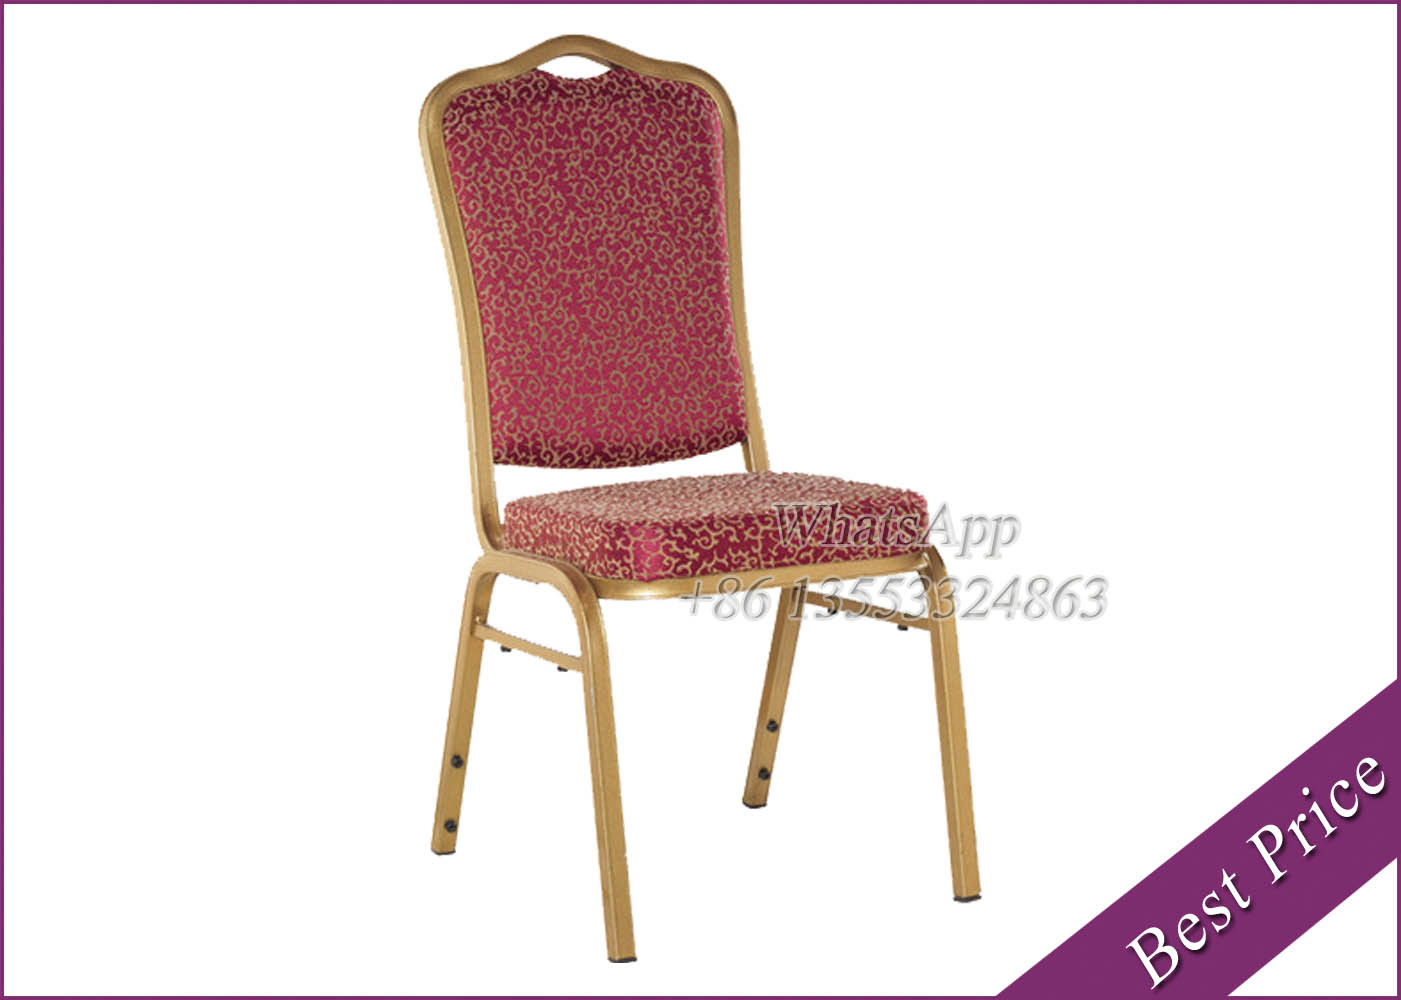 West Restaurant Fabric Chair at Low Price  (YA-4)